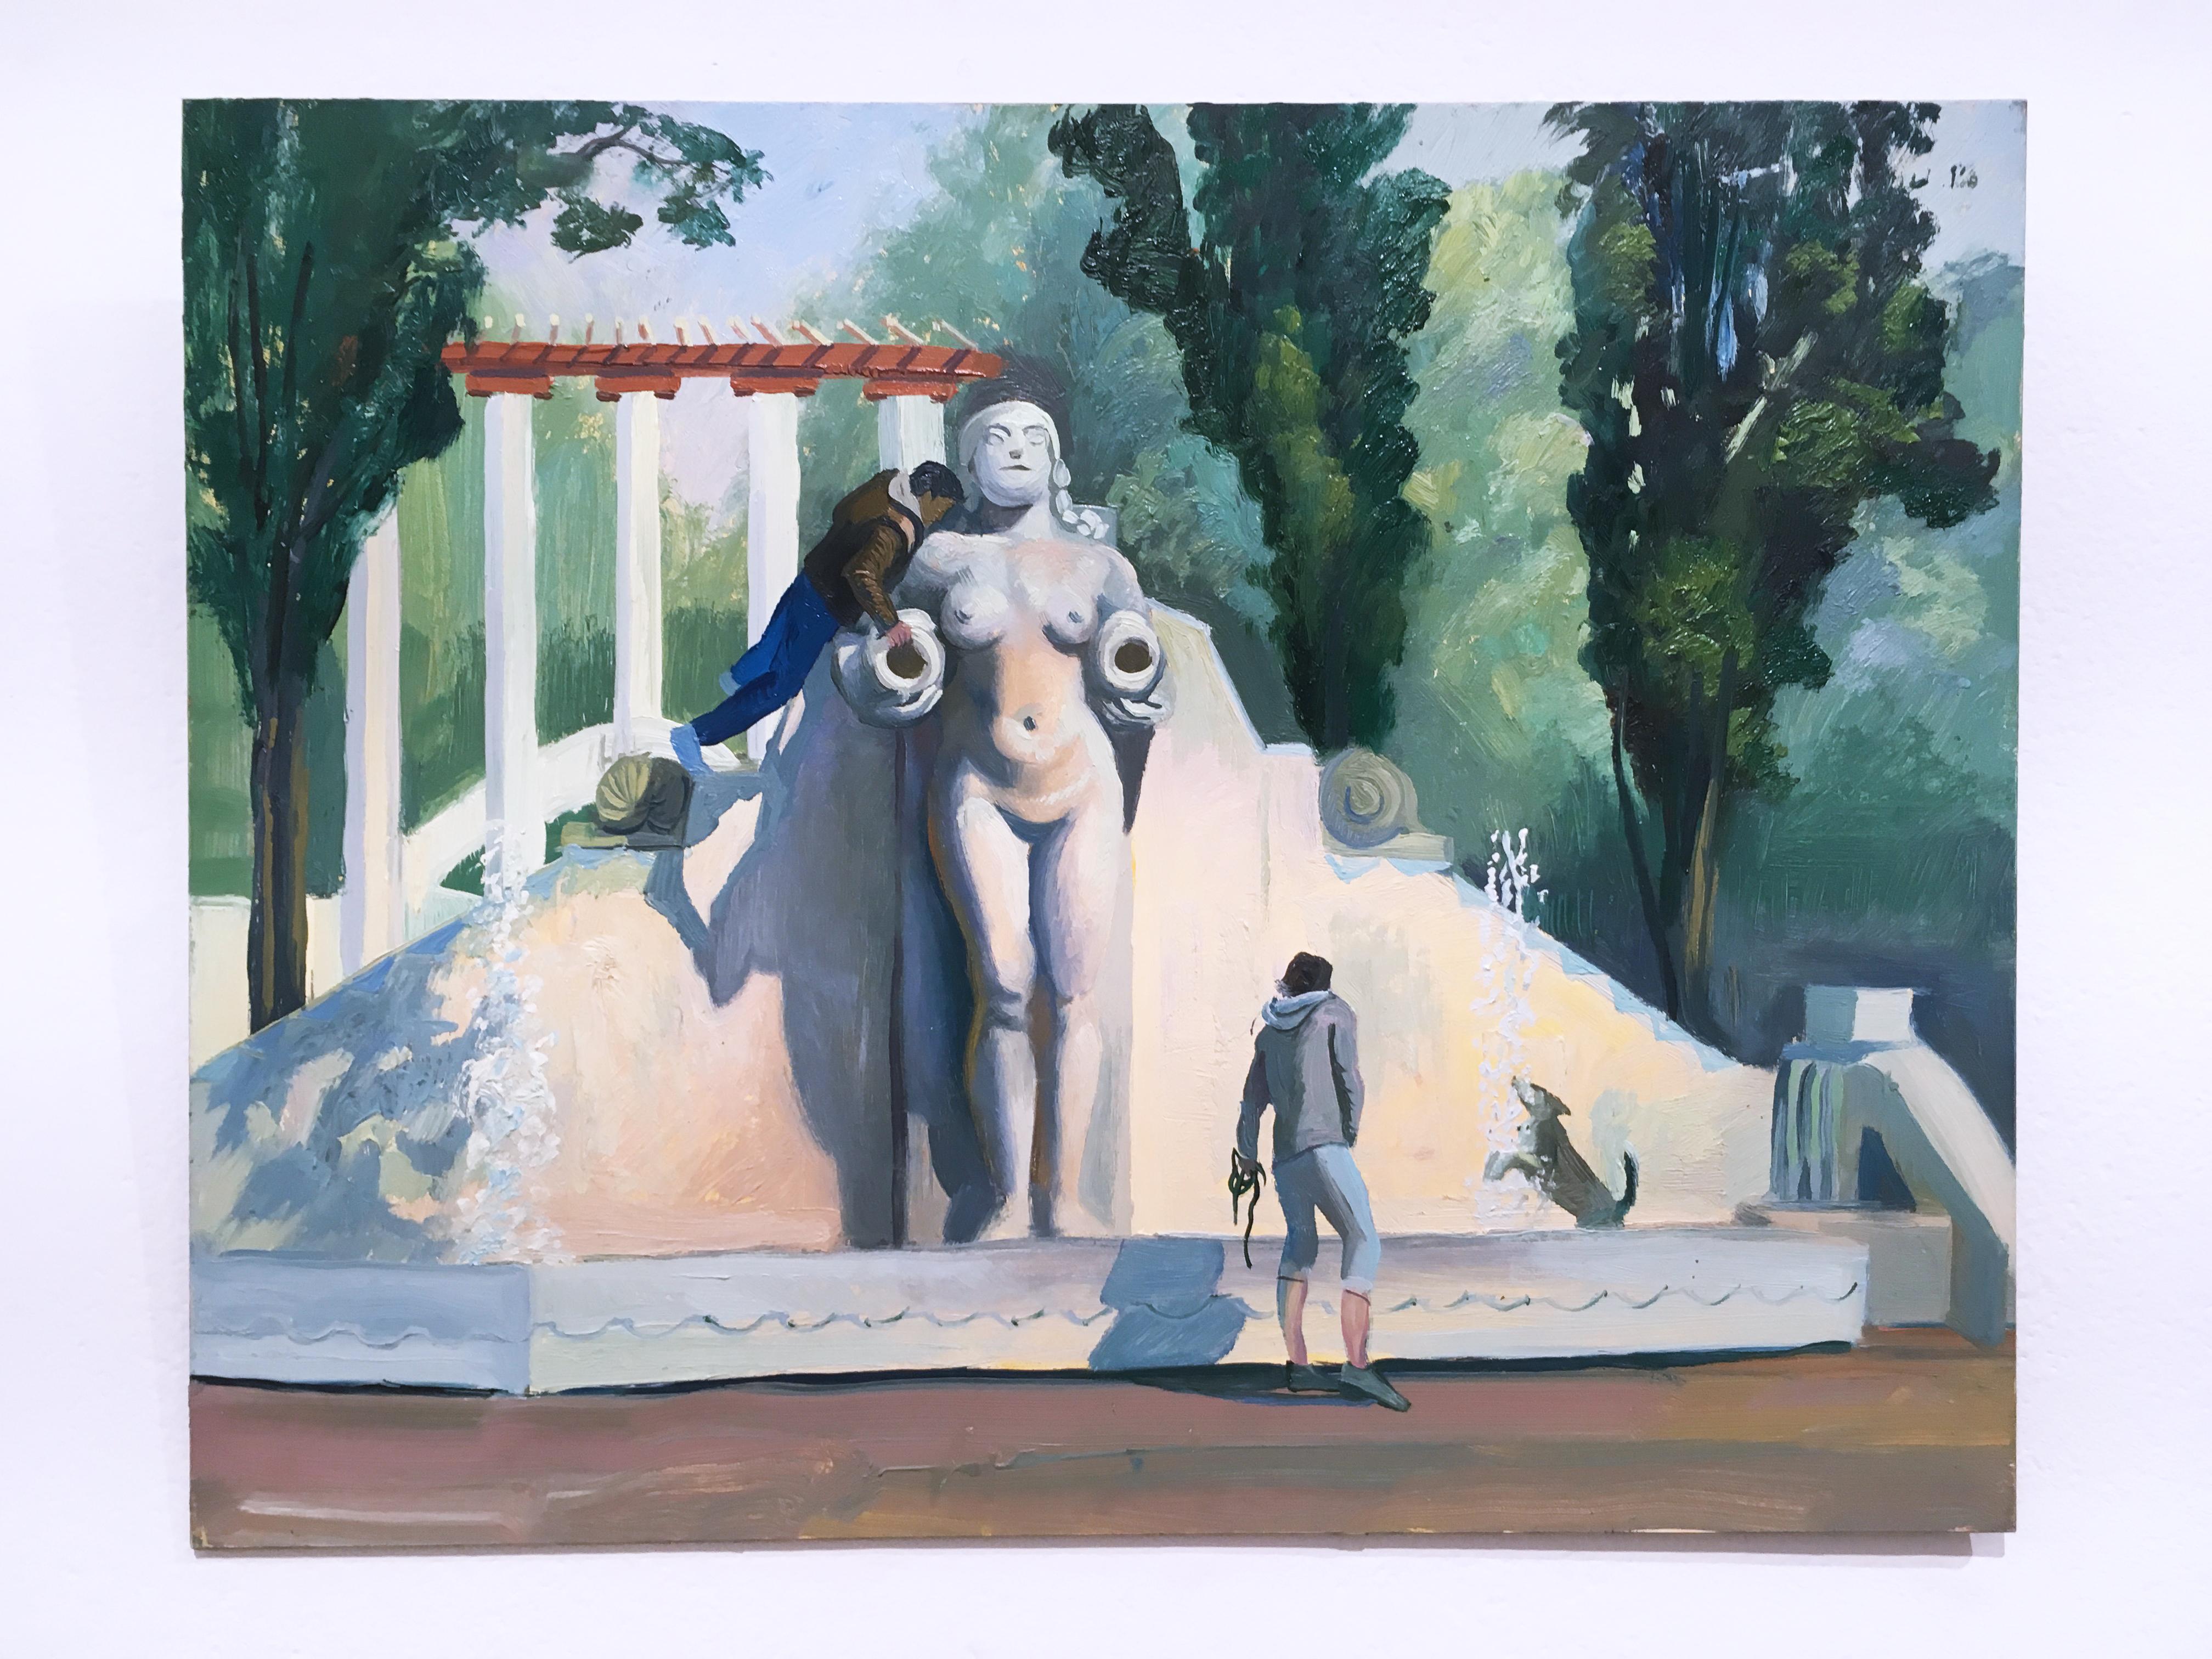 Mexico City 2, plein air figurative, landscape, oil on panel, 2018 - Painting by Thomas John Carlson